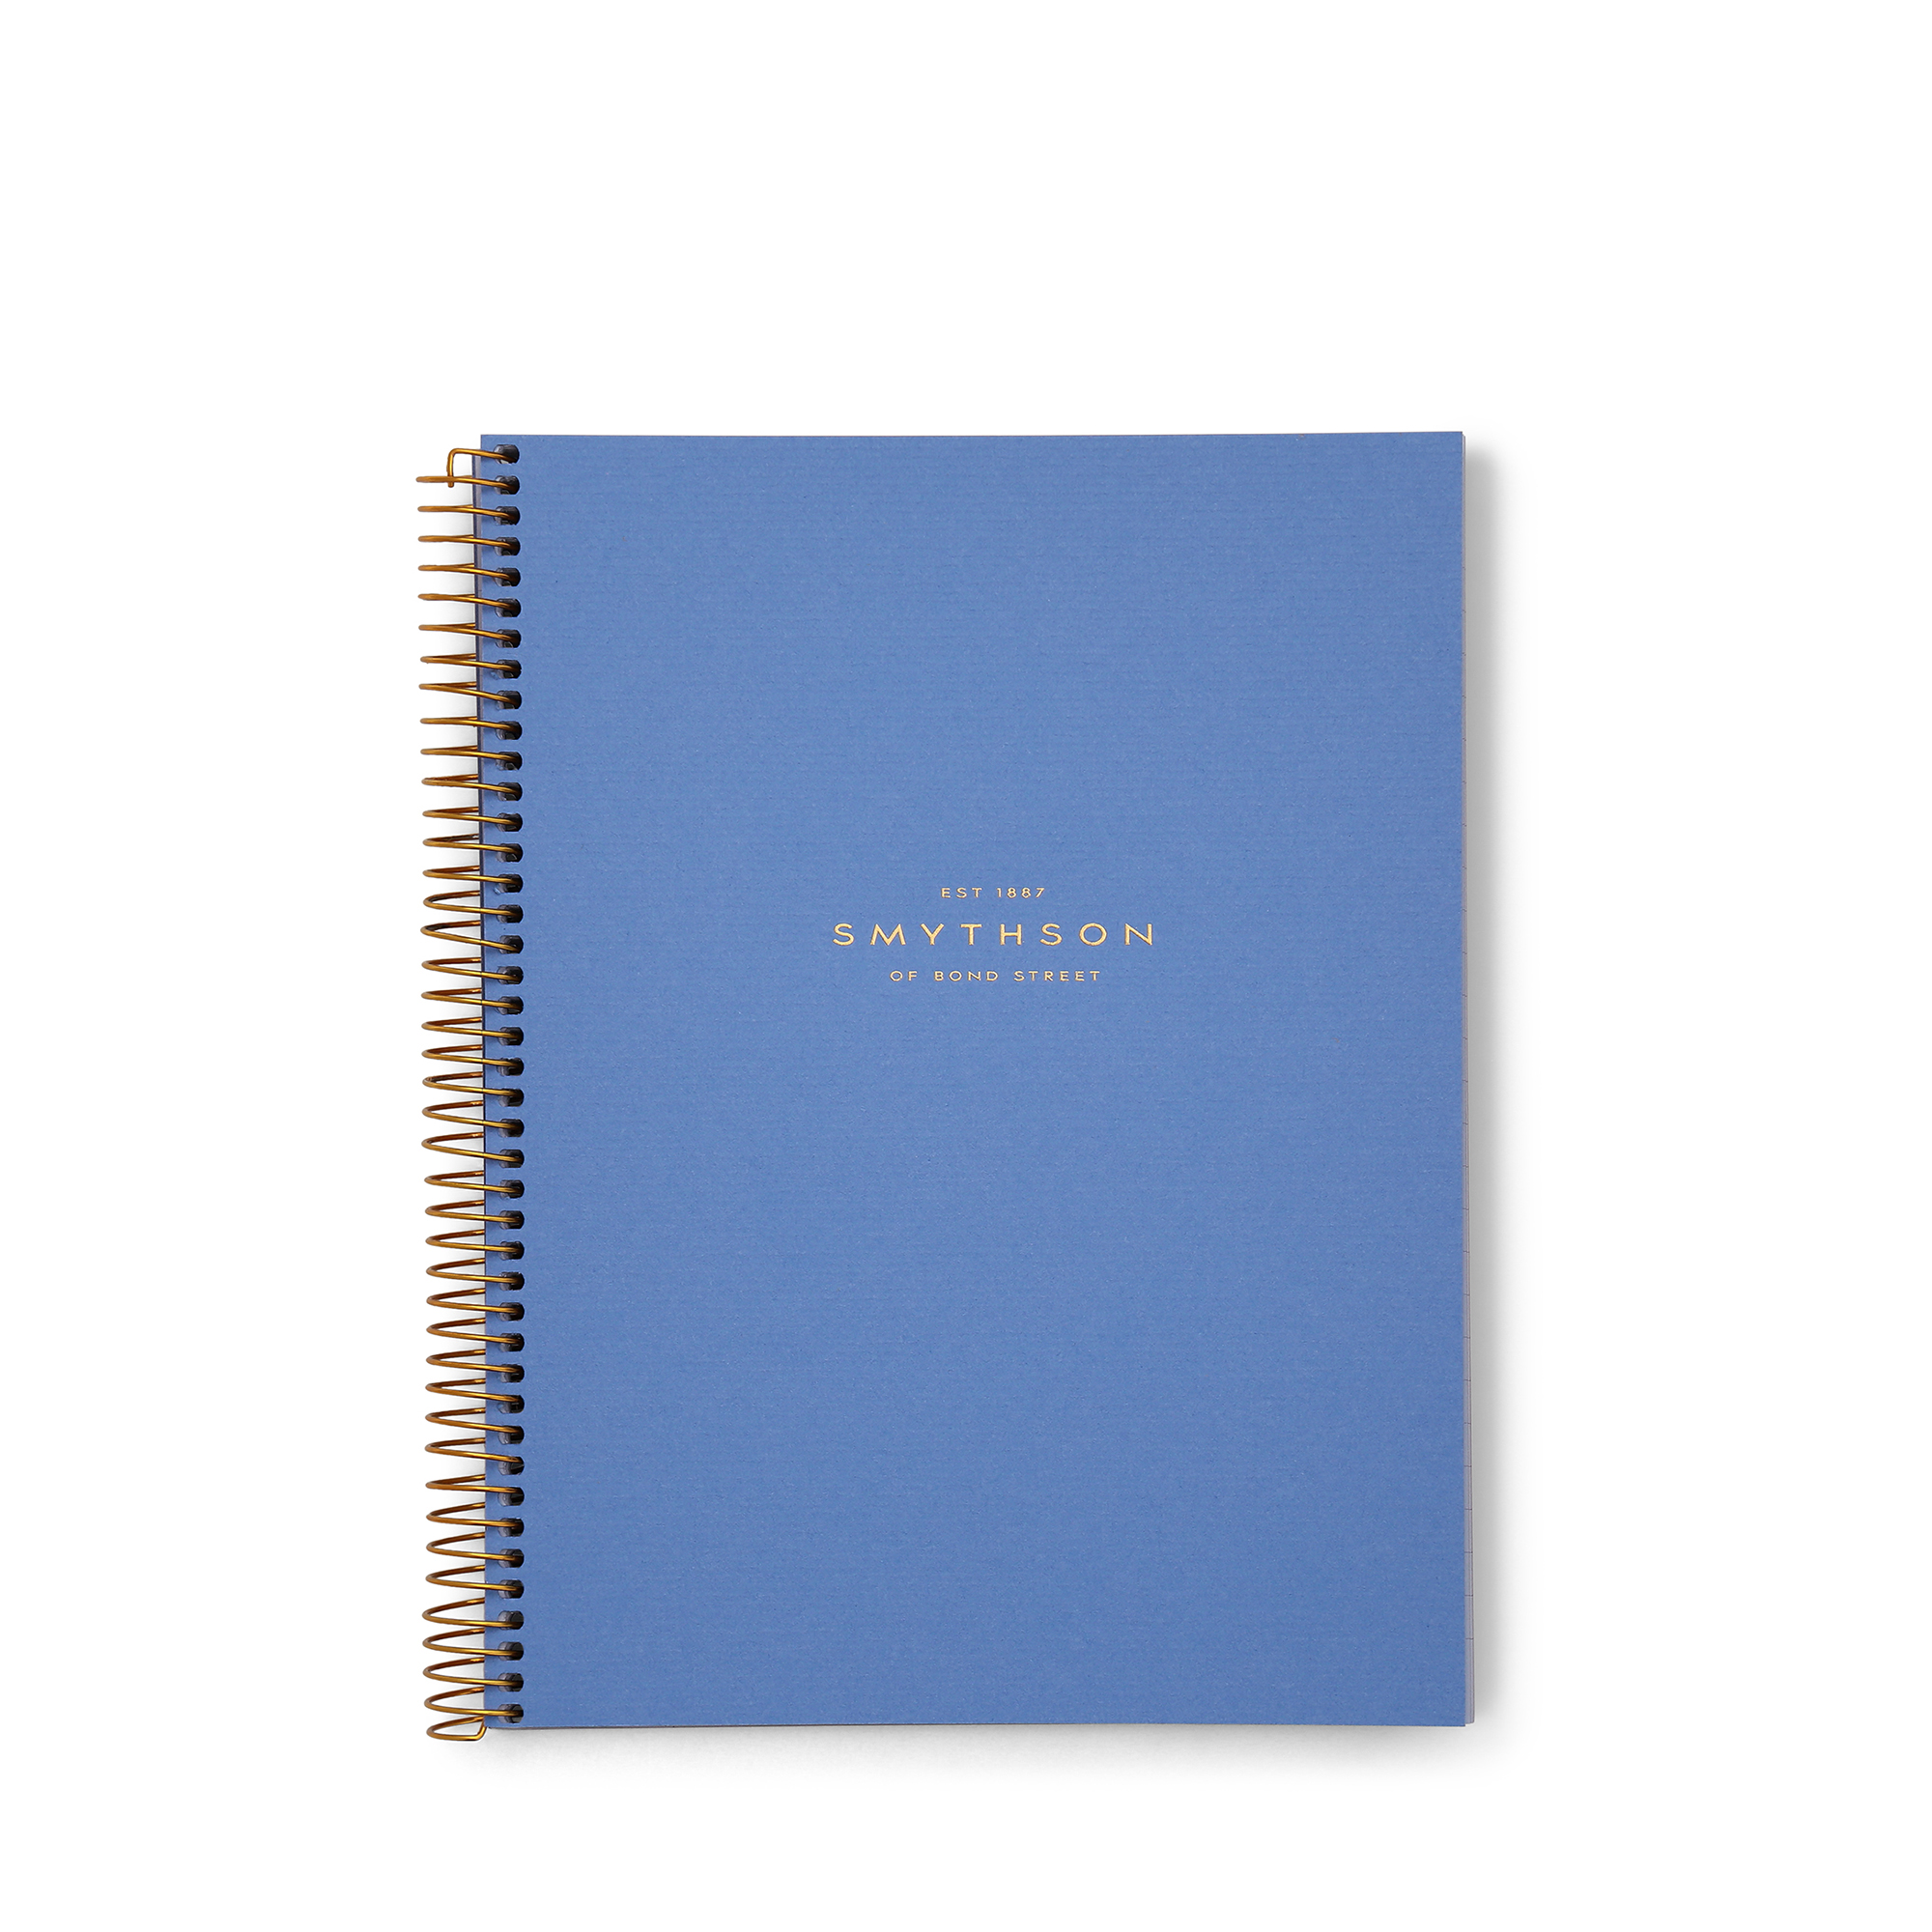 Smythson A5 Spiral Bound Refill Pad In Gold